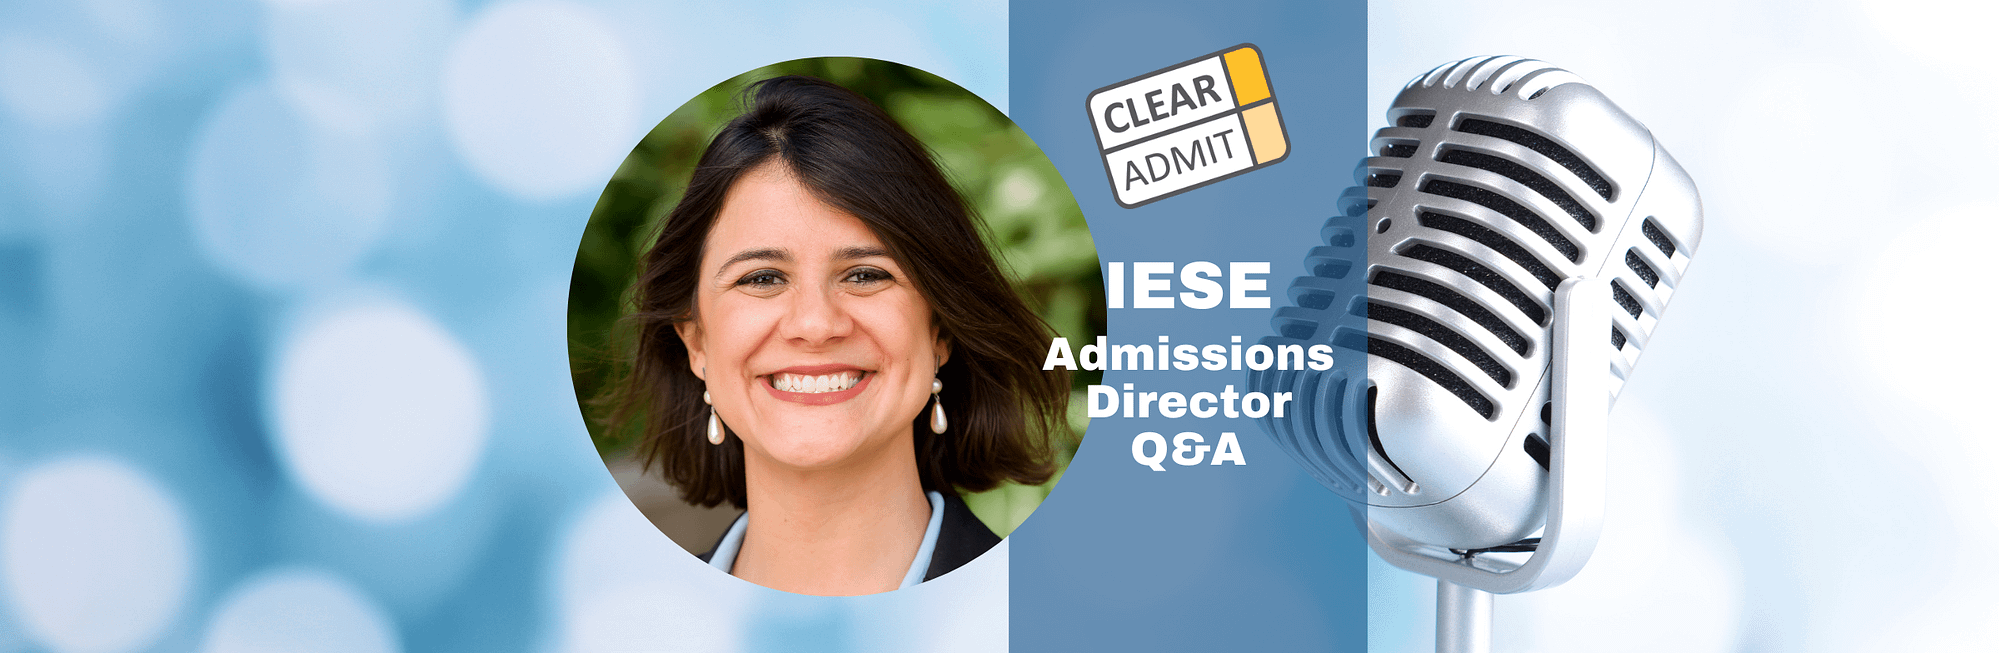 iese admissions